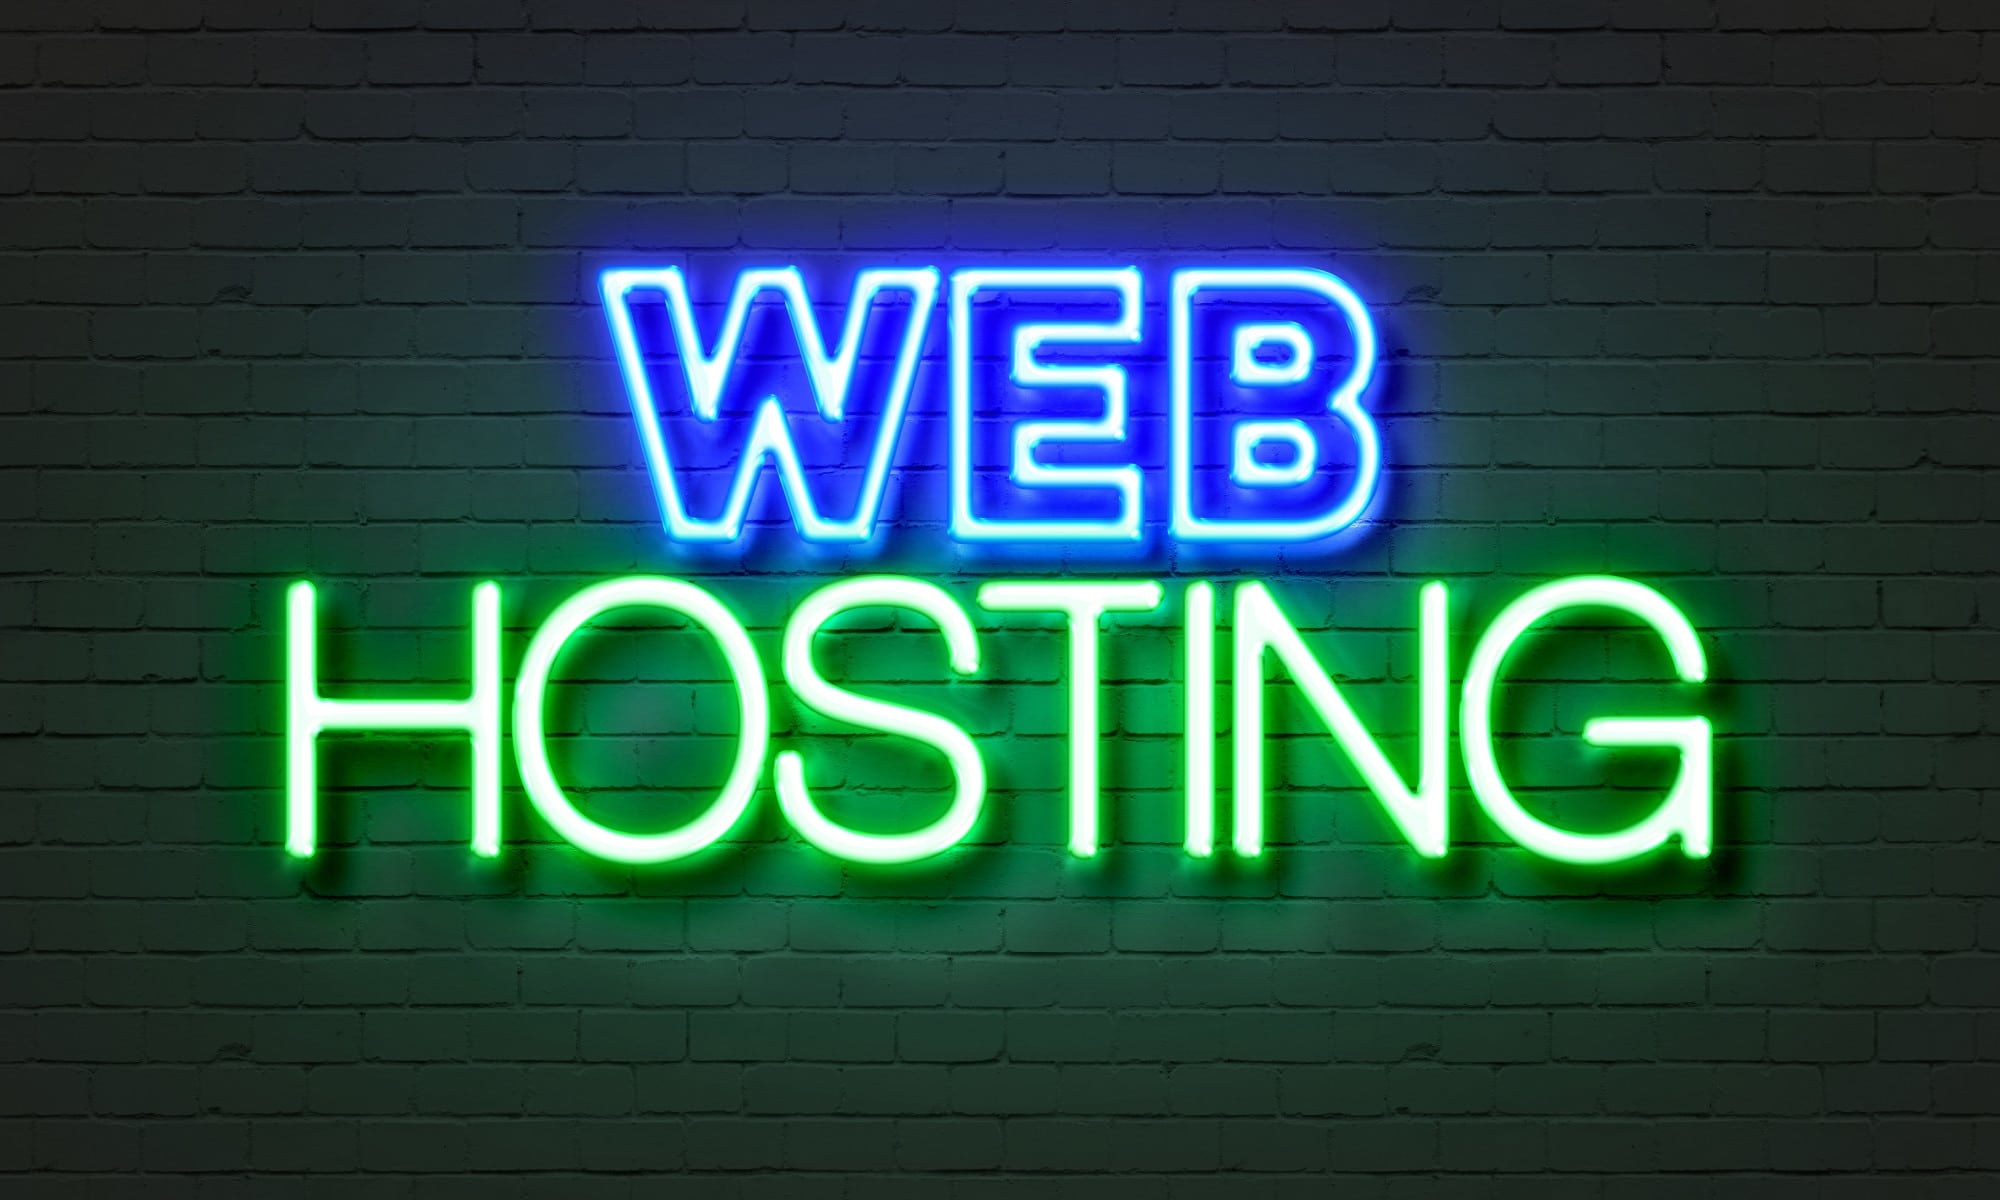 Web hosting neon sign on brick wall background.